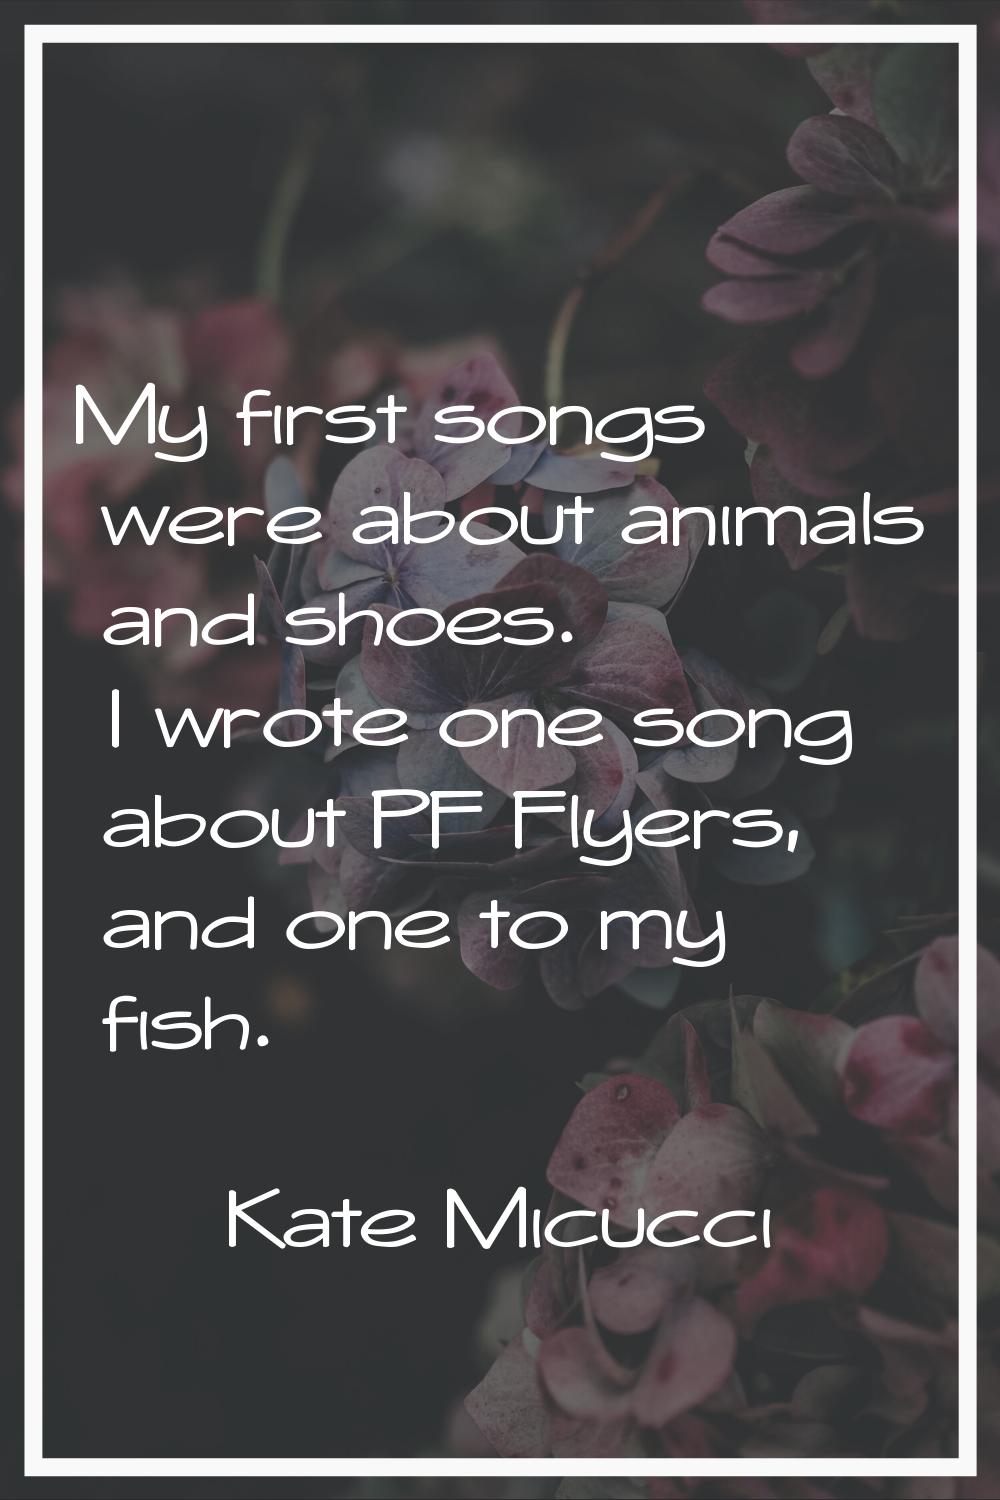 My first songs were about animals and shoes. I wrote one song about PF Flyers, and one to my fish.